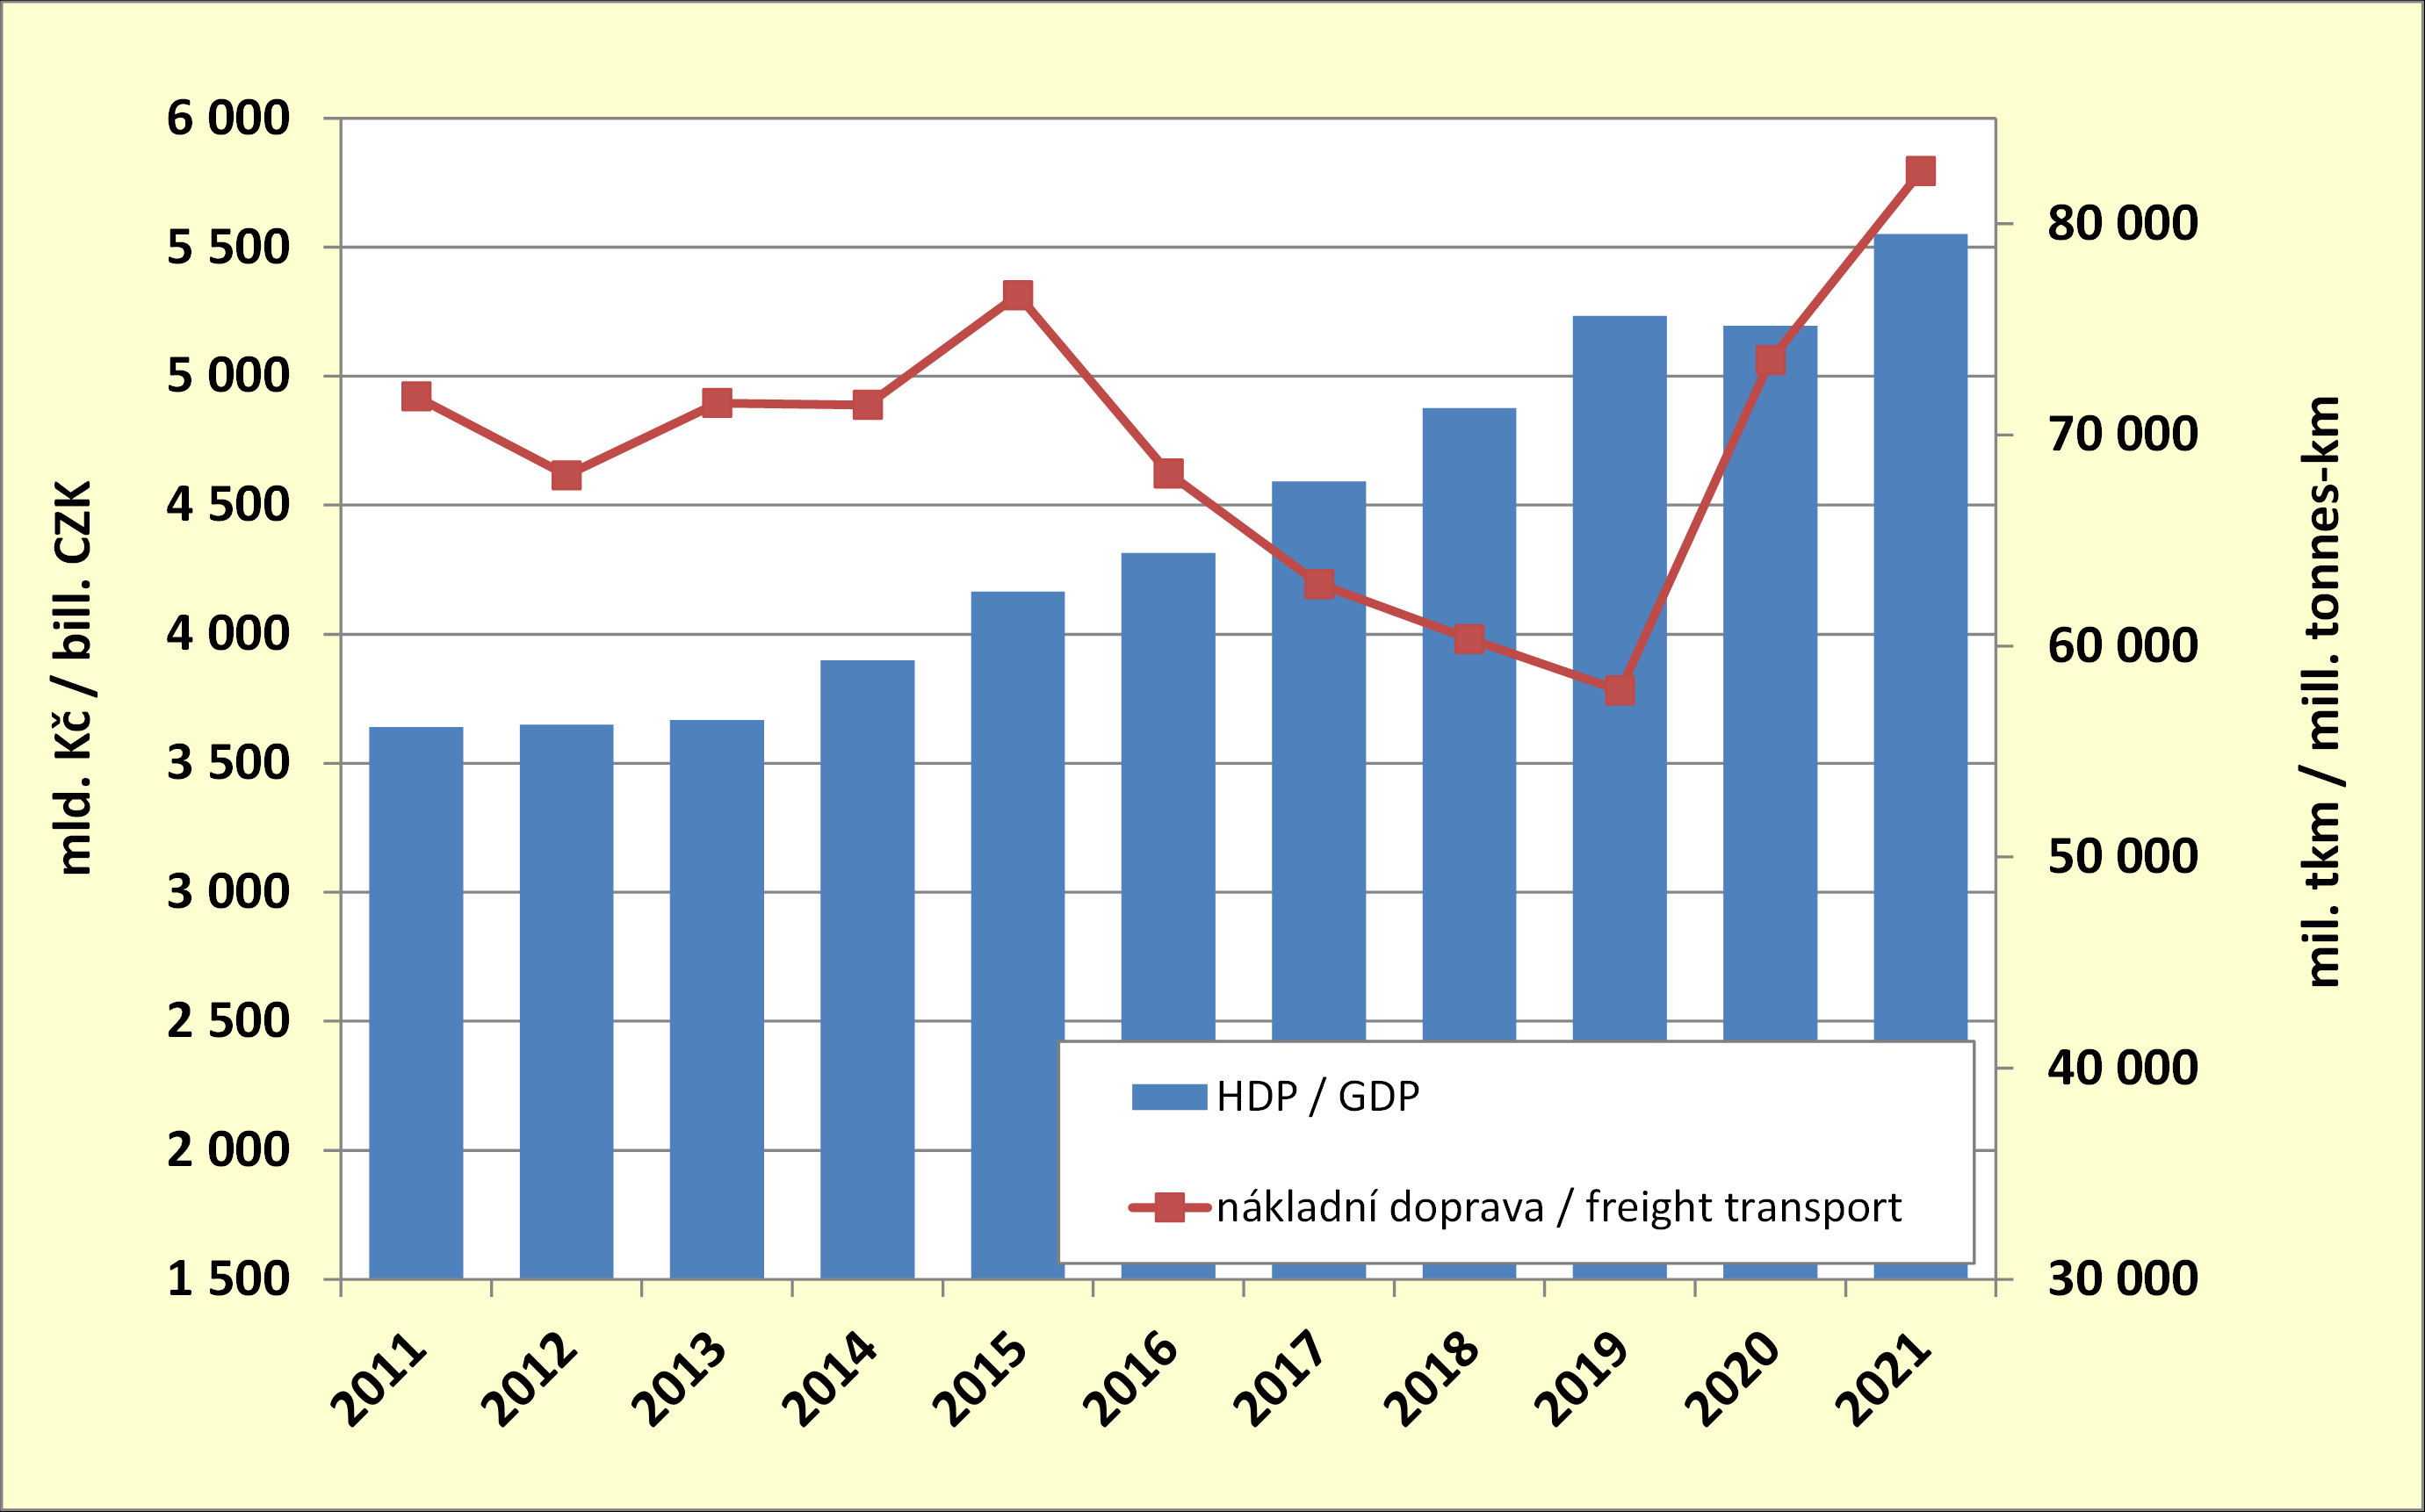 8.5. Development of GDP and performances of the goods transport